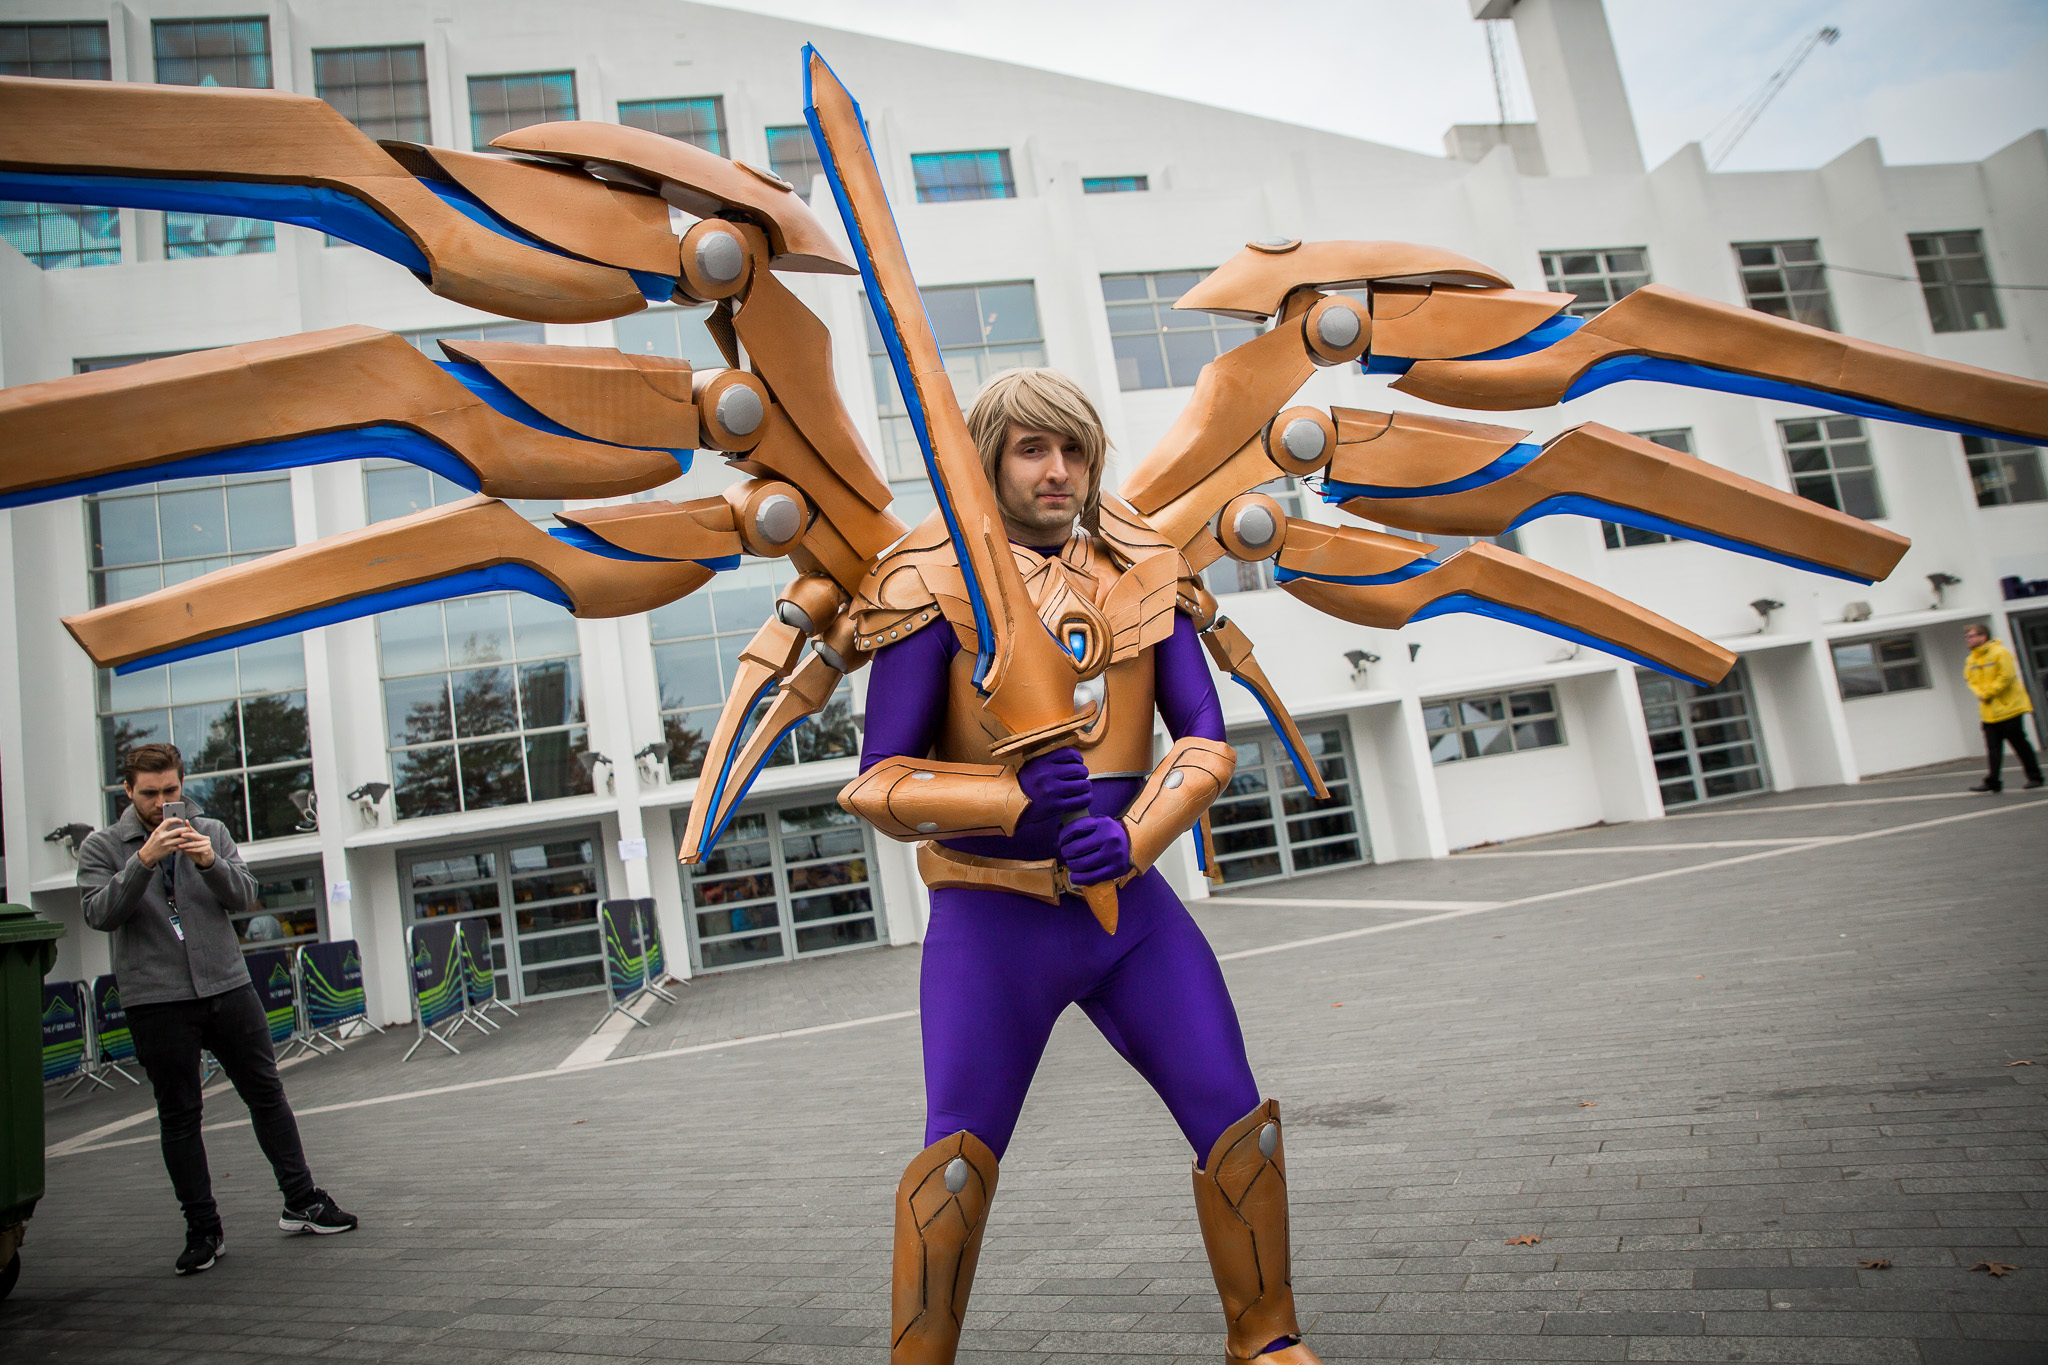 These Mechanised League Of Legends Wings Are This Man’s First Cosplay